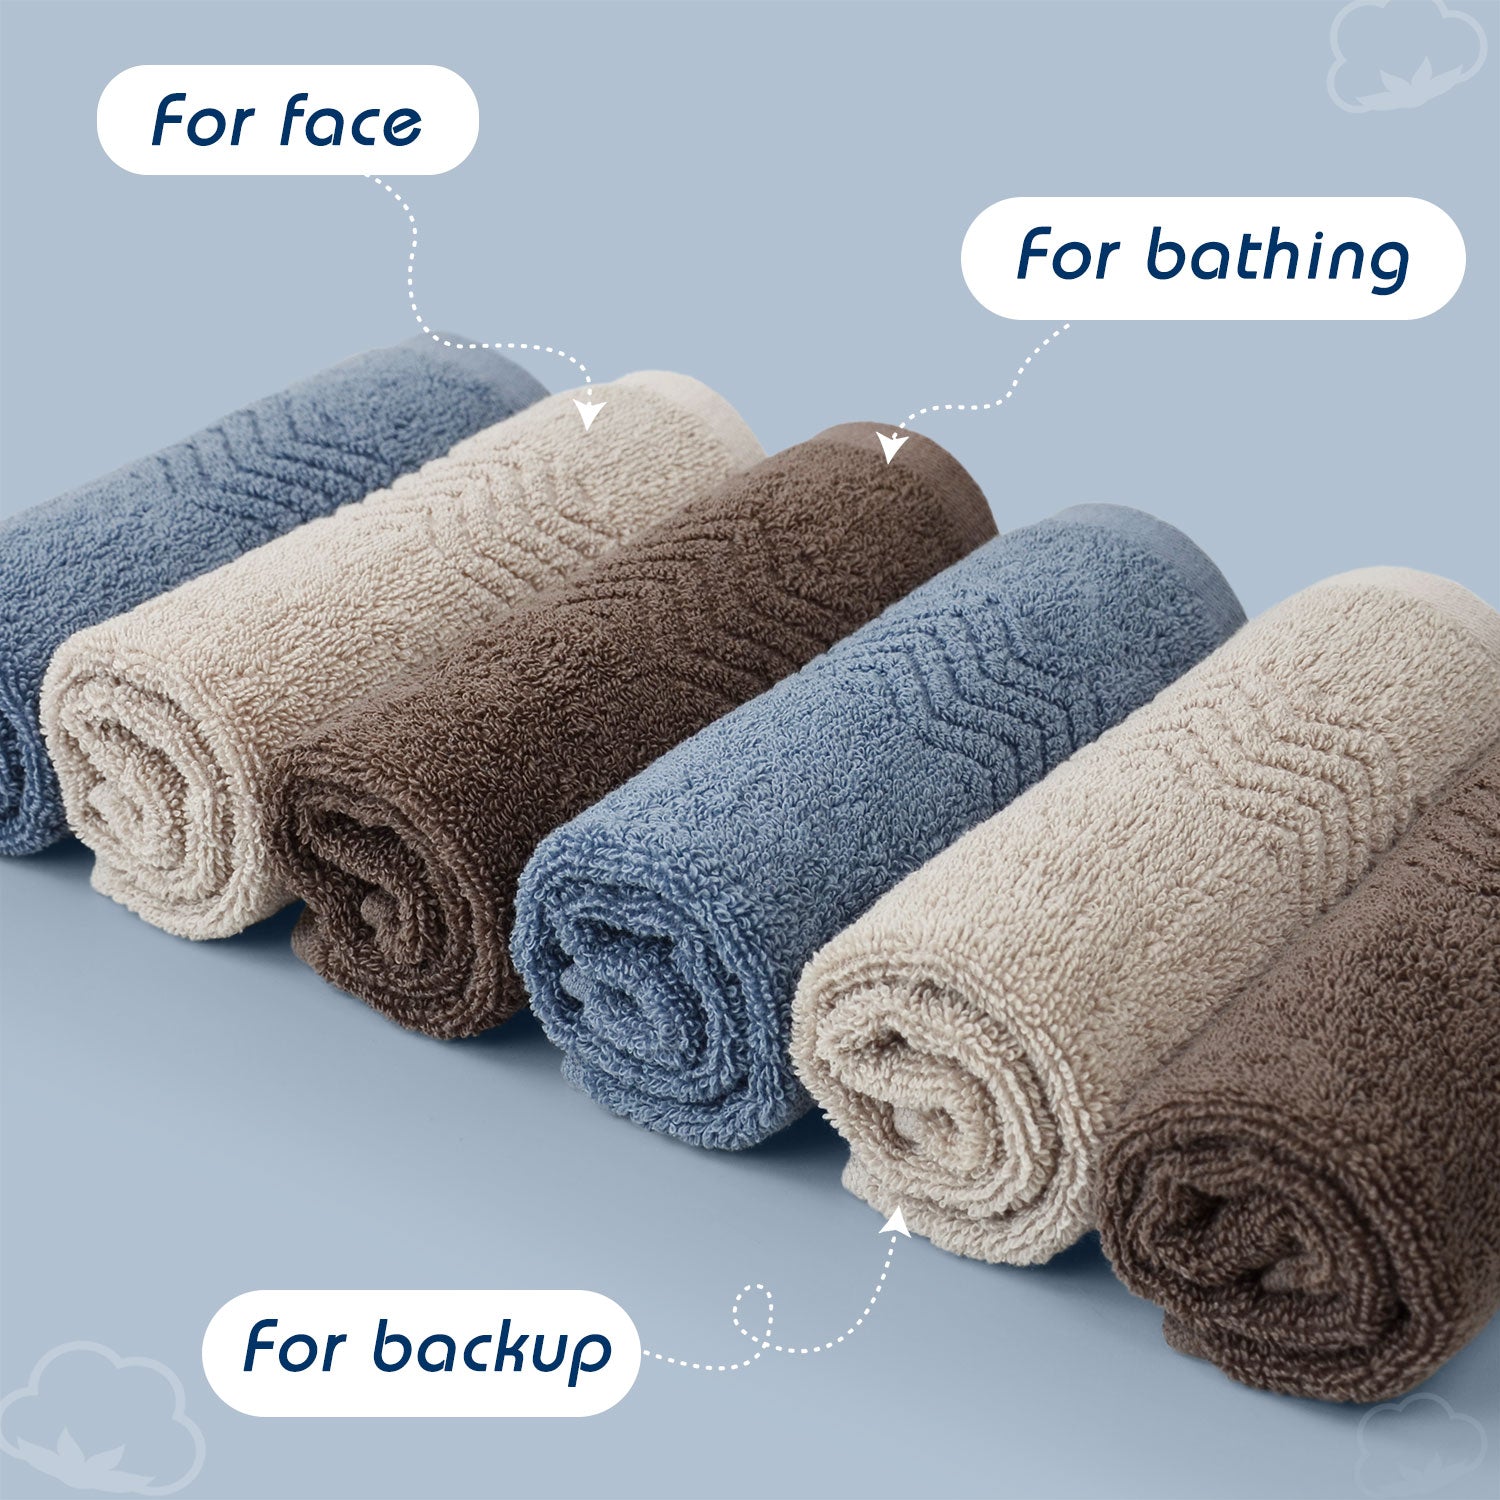 Cleanbear Wash Cloths 12 Pack for Body and Face, Bulk Wash Cloth with  Assorted Colors Soft Washcloths 13 by 13 Inches (12 Pieces 6 Colors) Rust,  Baby Pink, Brown, Blue Grey, Lavender,greengage